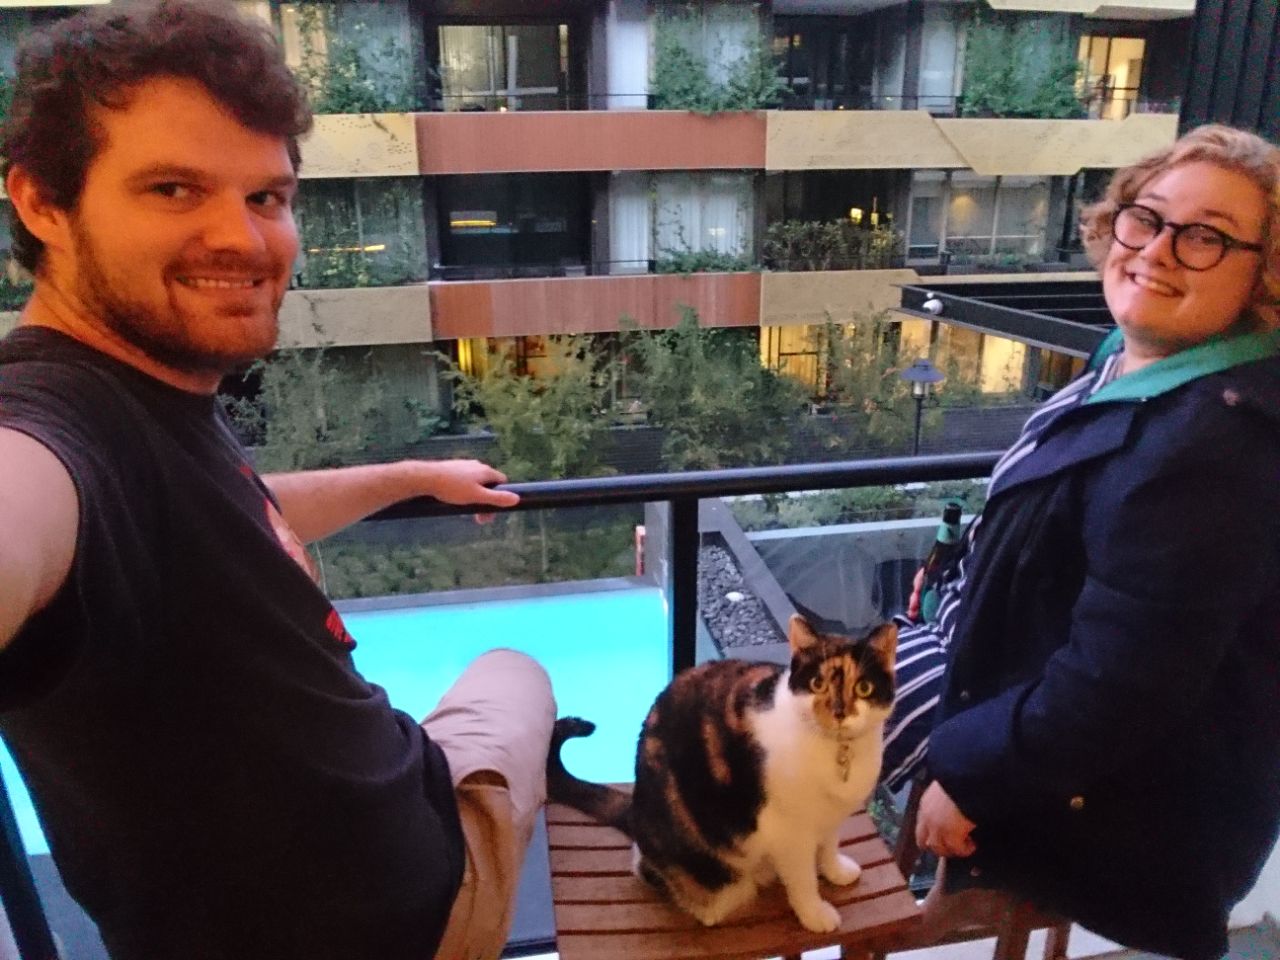 rocky, grace and harriet (the cat) on a balcony on a cold, locked-down may evening